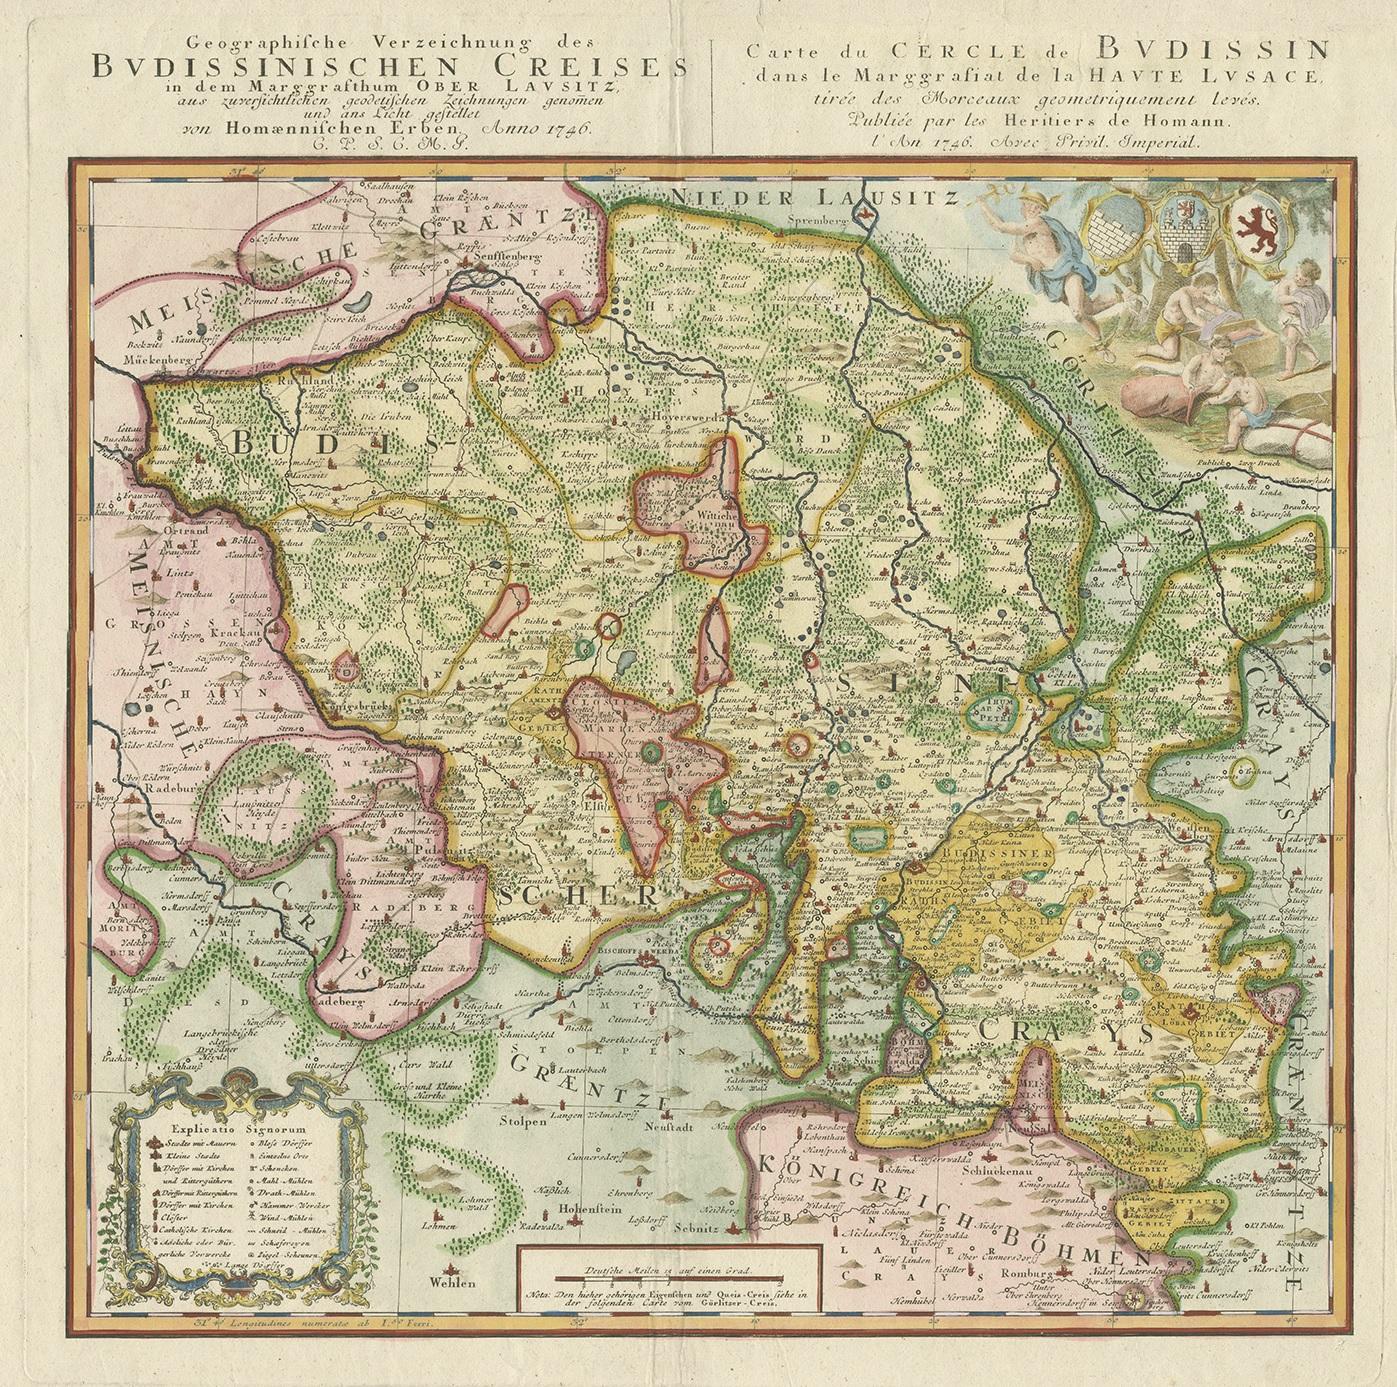 Antique map titled 'Geographische Verzeichnung des Budissinischen Creises (..) - Carte du Cercle de Budissin (..)'. Copper engraved map of Oberlausitz, a historical region of Saxony & Germany that covers land now split between Germany and Poland.